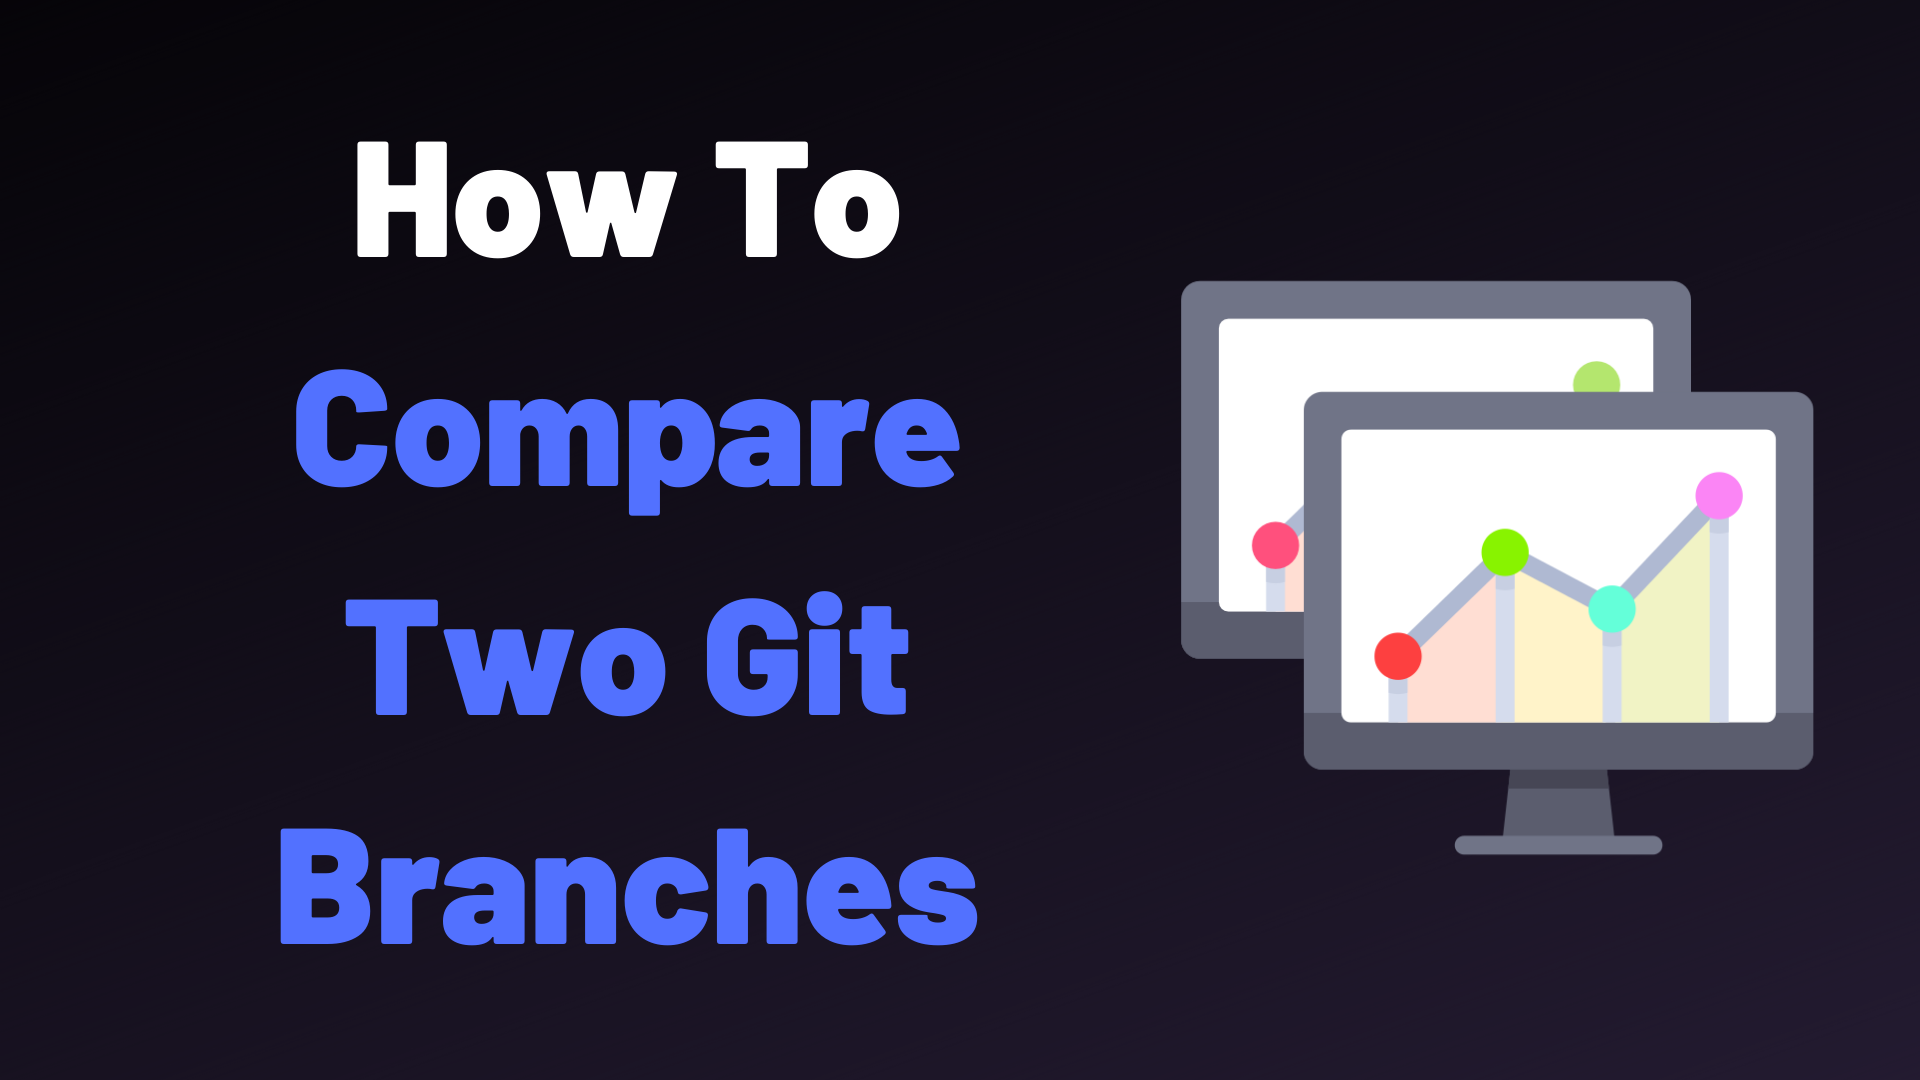 How To Compare Two Git Branches